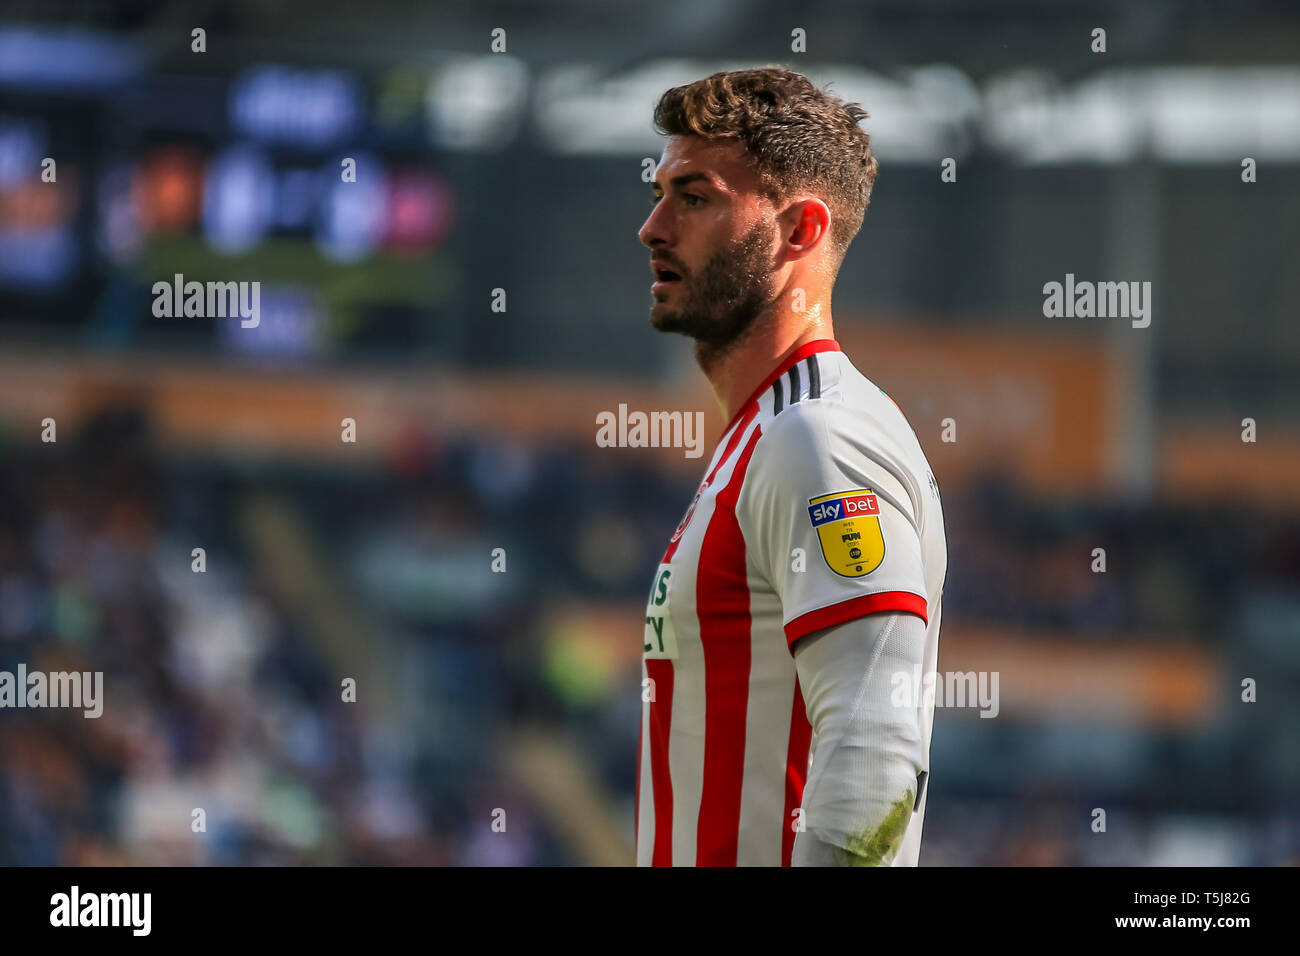 22nd April 2019 , KCOM Stadium, Hull , England; Sky Bet Championship, Hull City vs Sheffield United ;   Gary Madine (14) of Sheffield United during the game  Credit:   Craig Milner/News Images  English Football League images are subject to DataCo Licence Stock Photo